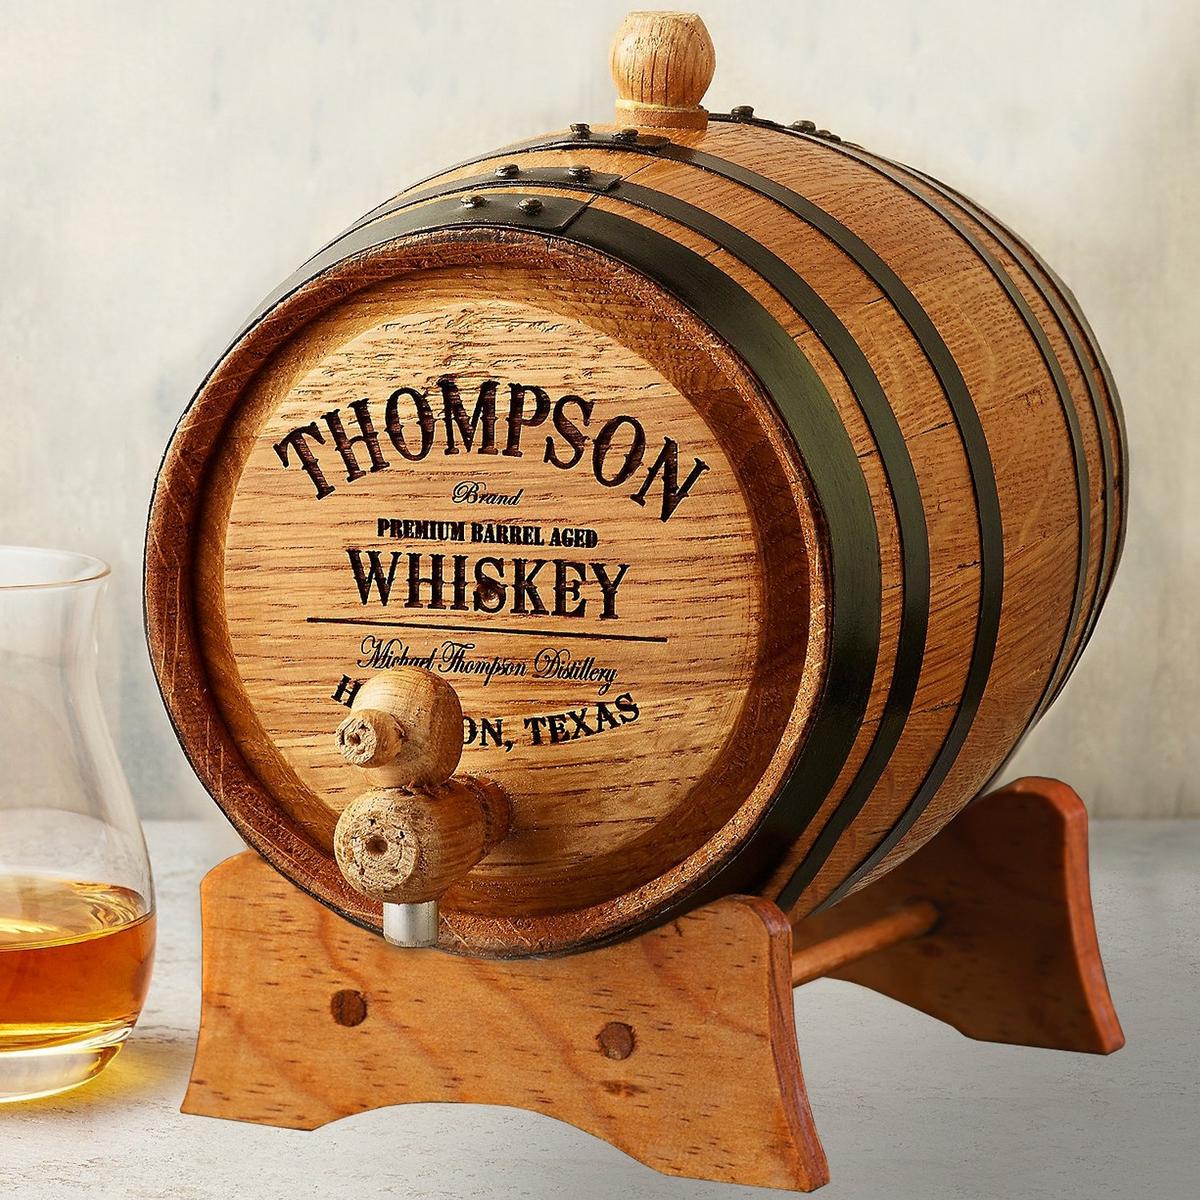 a personalized little whiskey cask hand-made from American white oak, reinforced with steel hoops comes with a wooden stand, care instructions, and storing/sterilization tablet